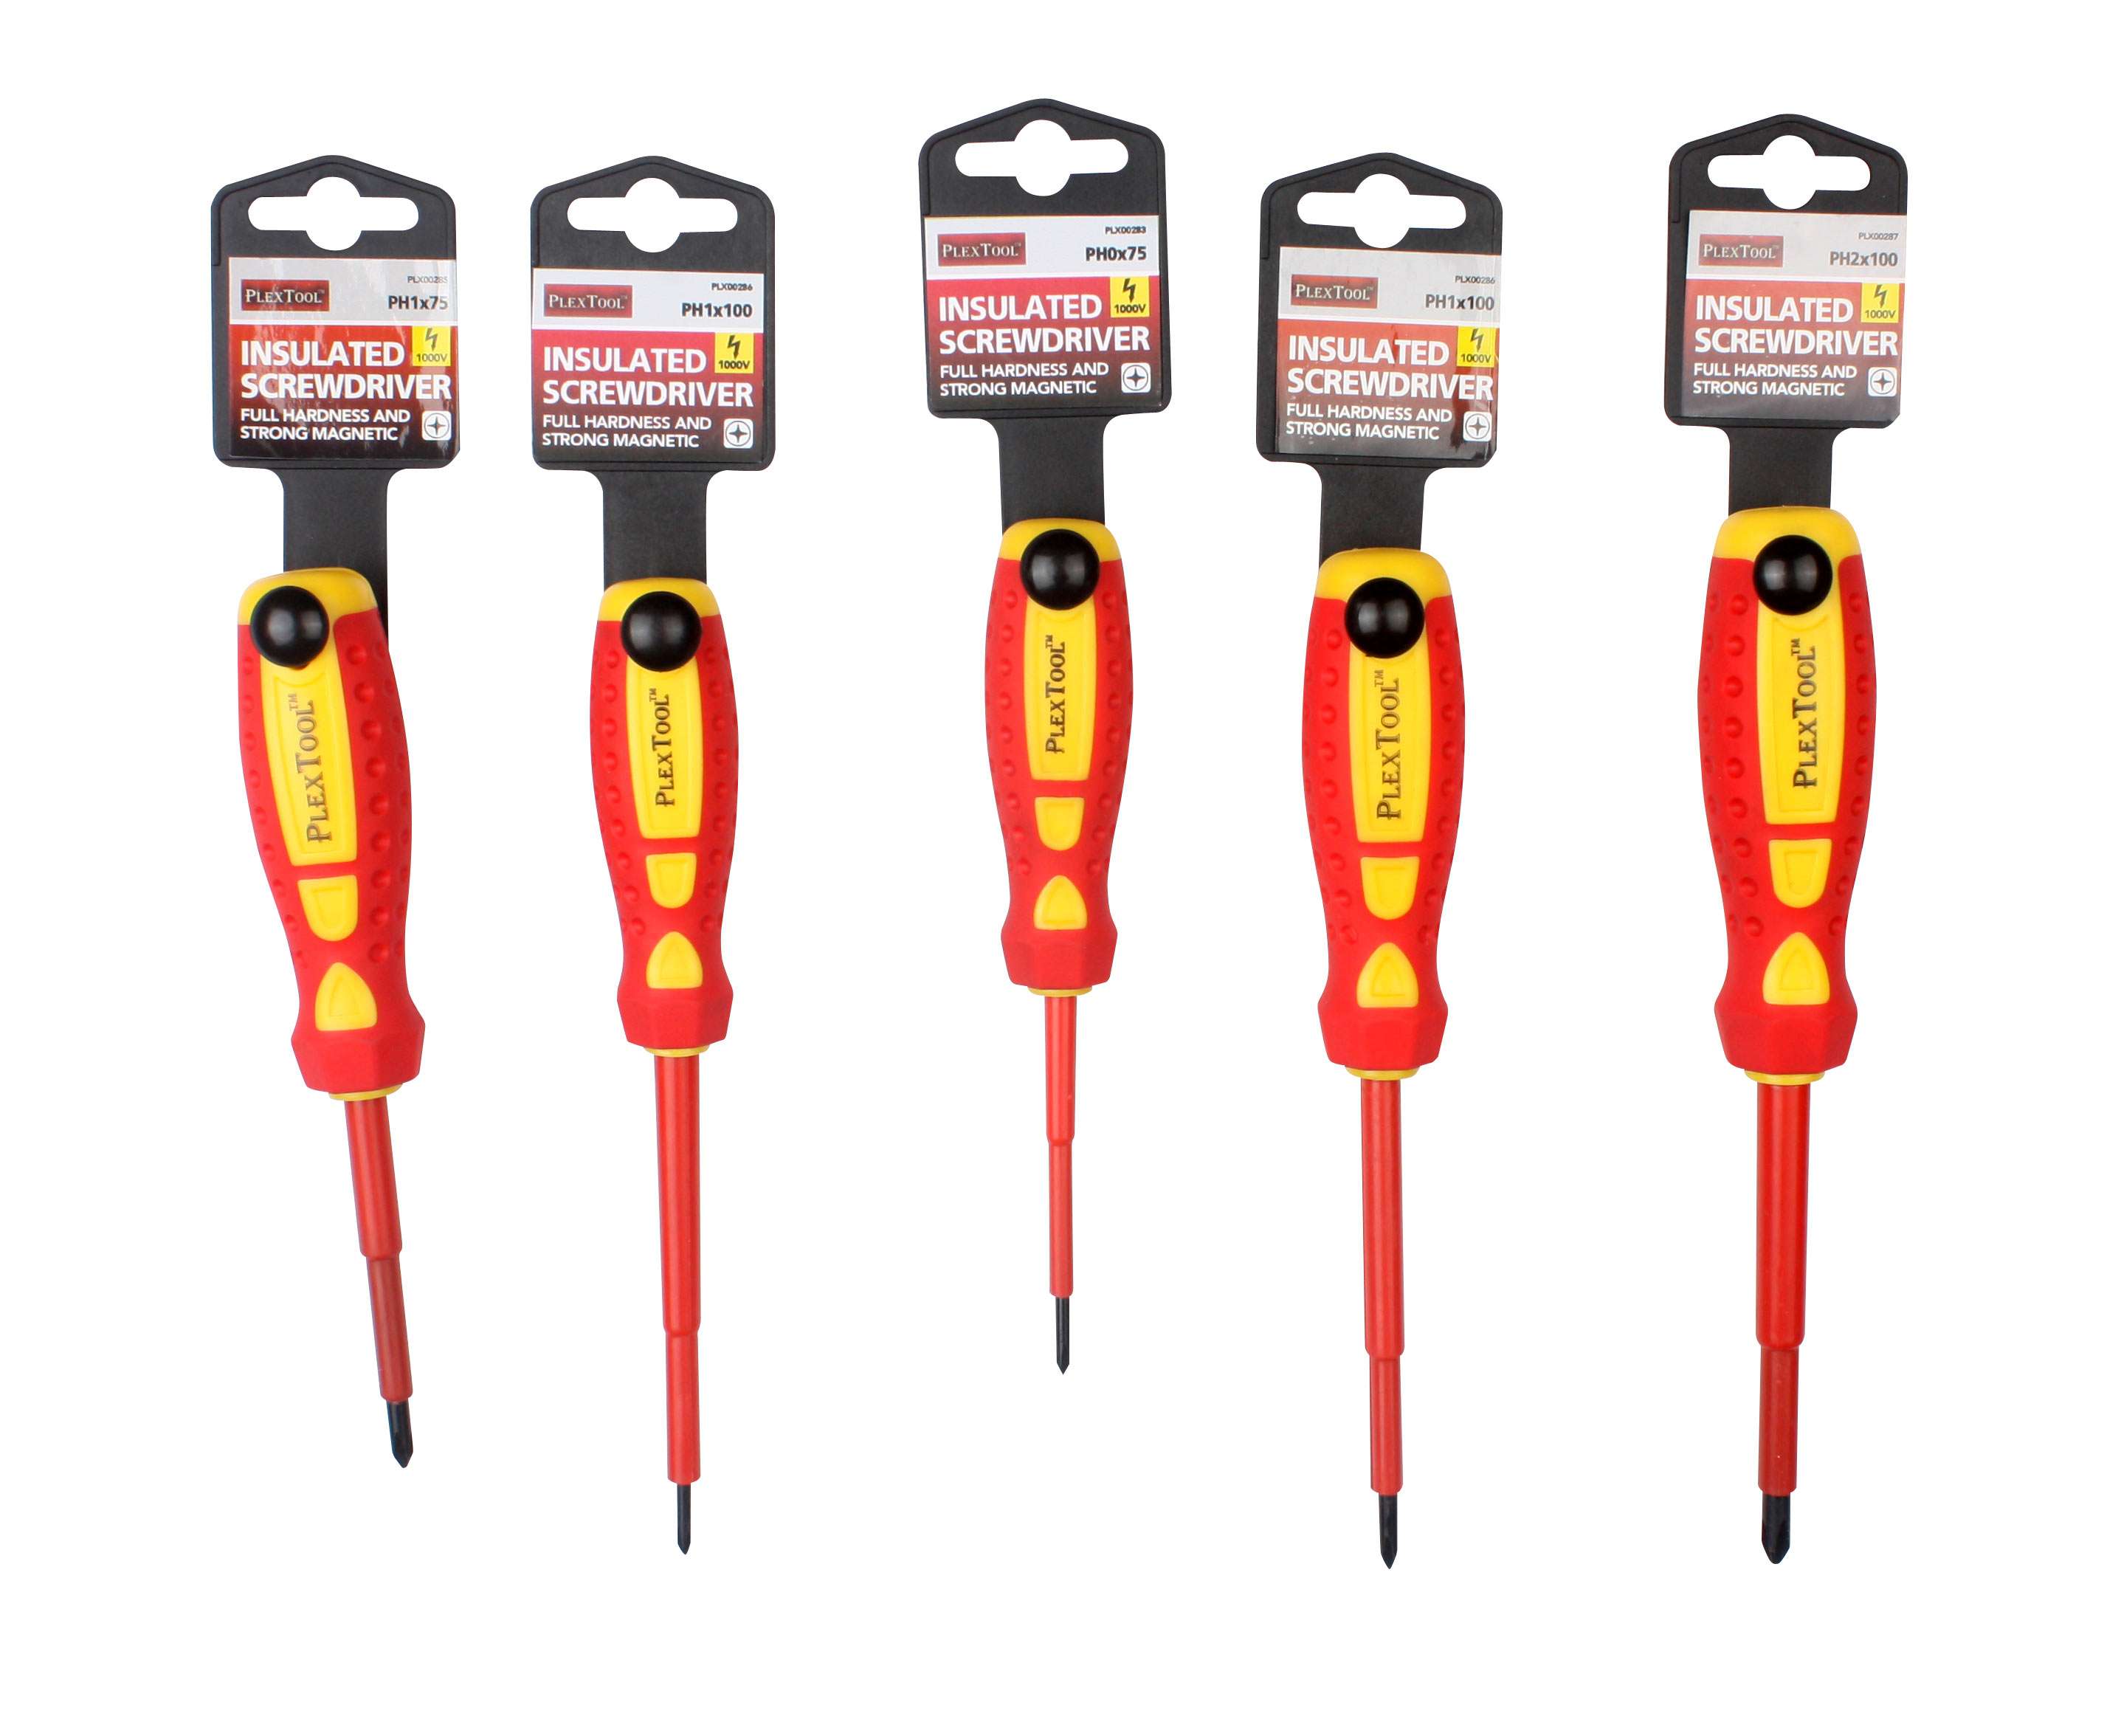 3"L x PH1 Full Hardness Strong Magnetic Insulated Screwdriver - 1